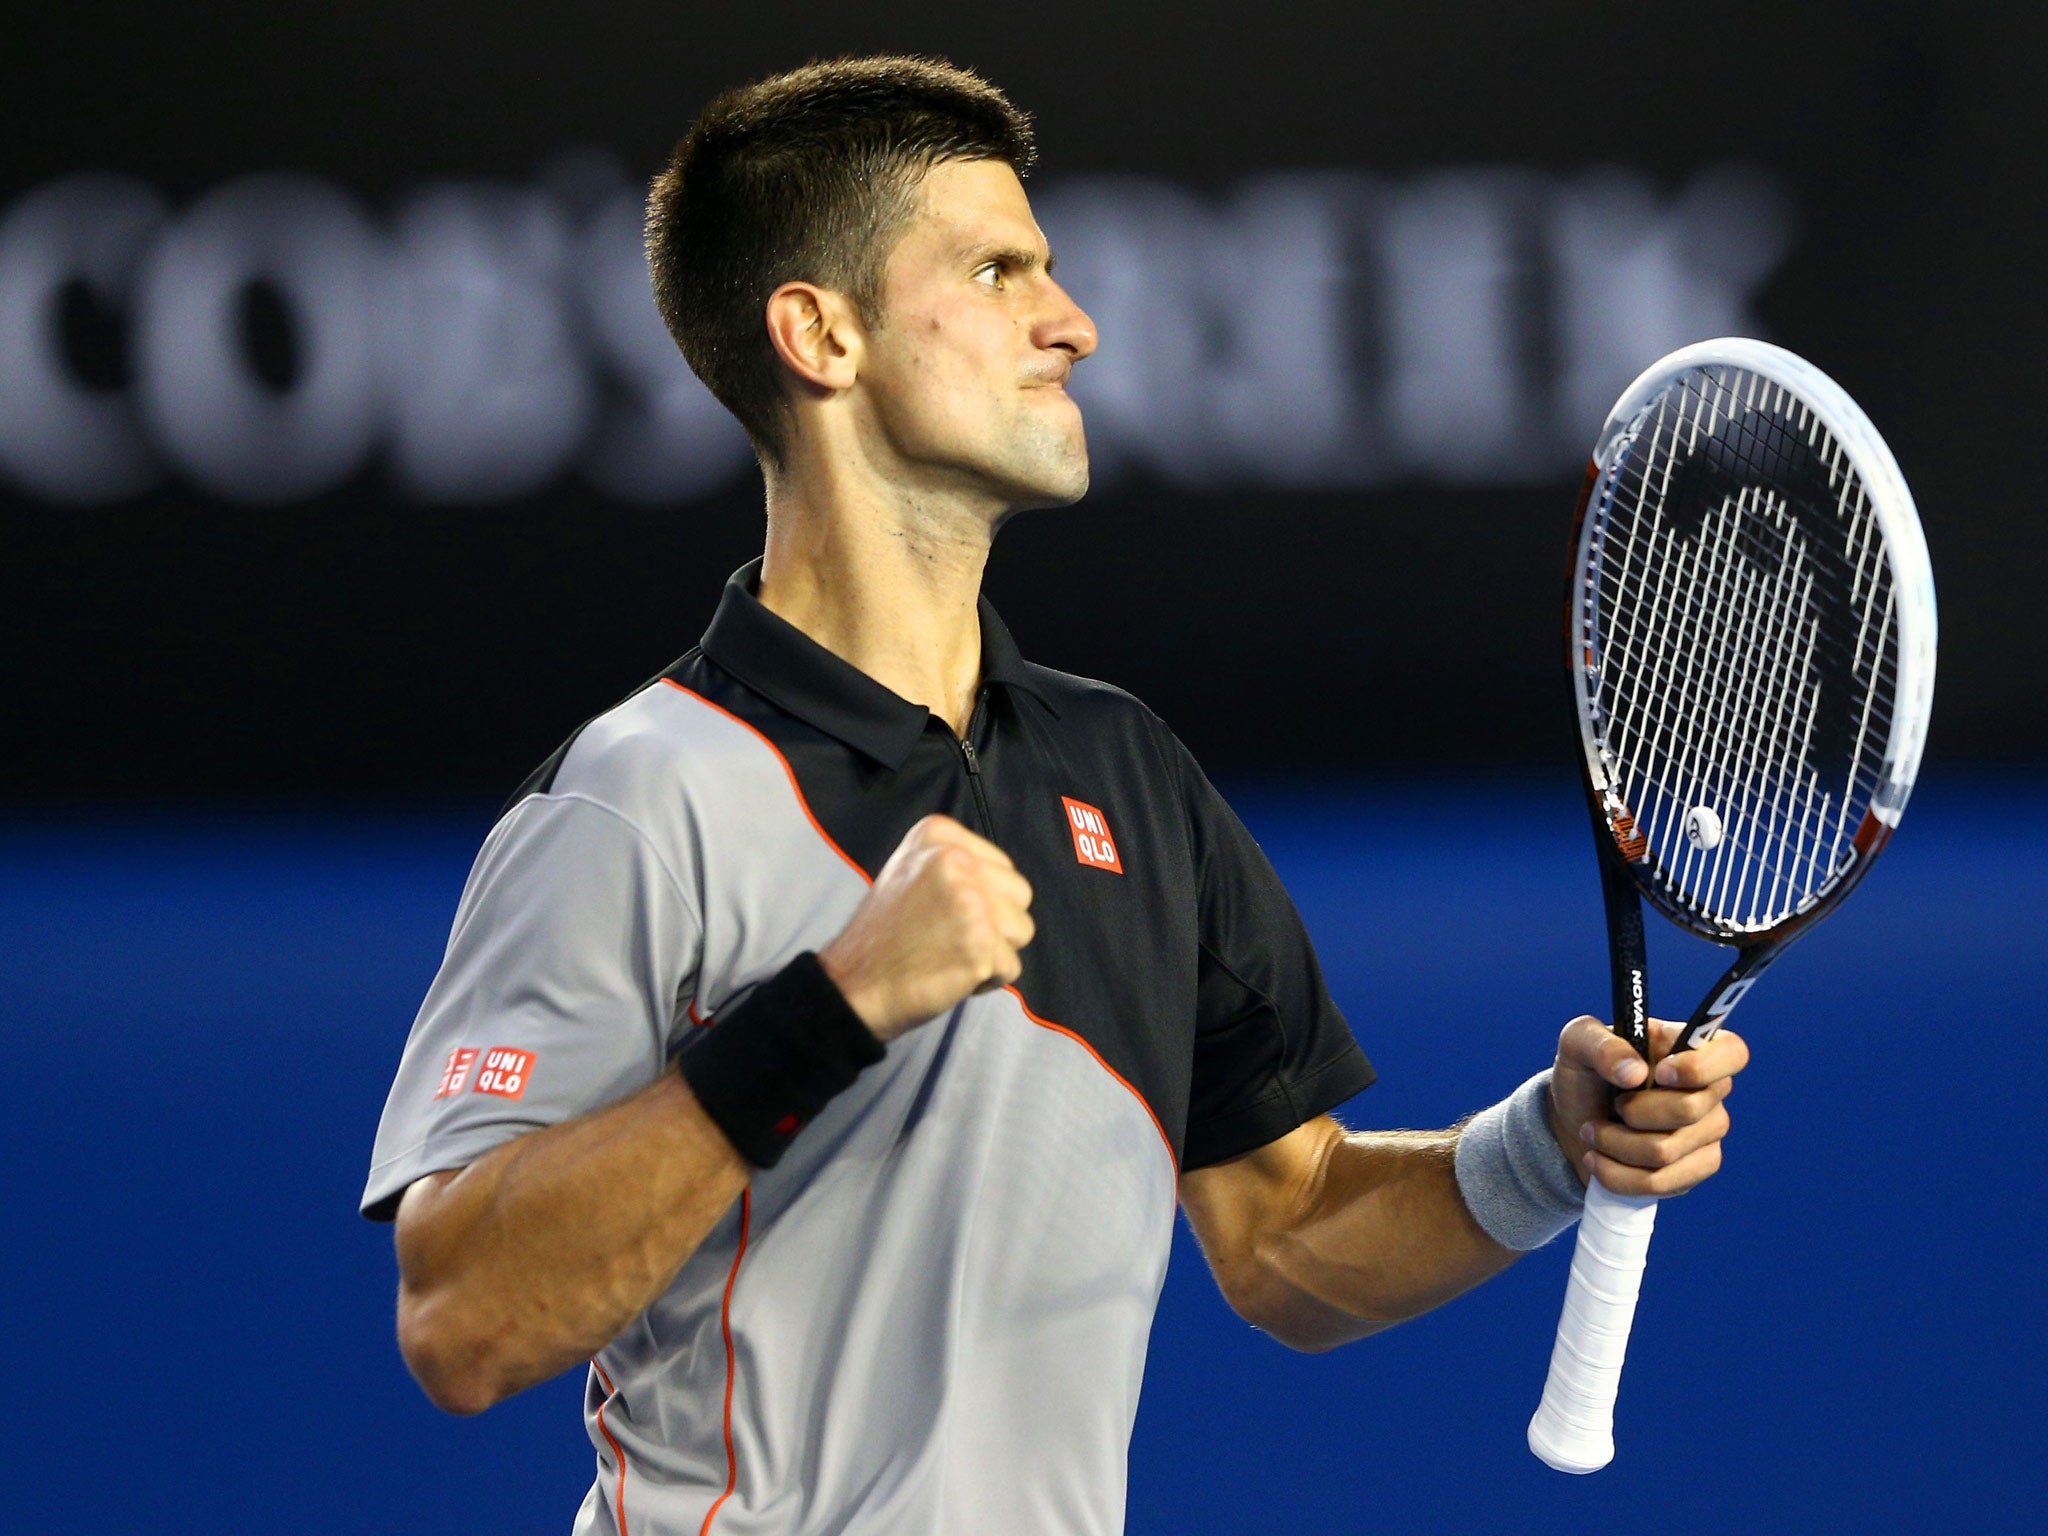 Novak Djokovic celebrates a point in his first round victory against Lukas Lacko of Slovakia